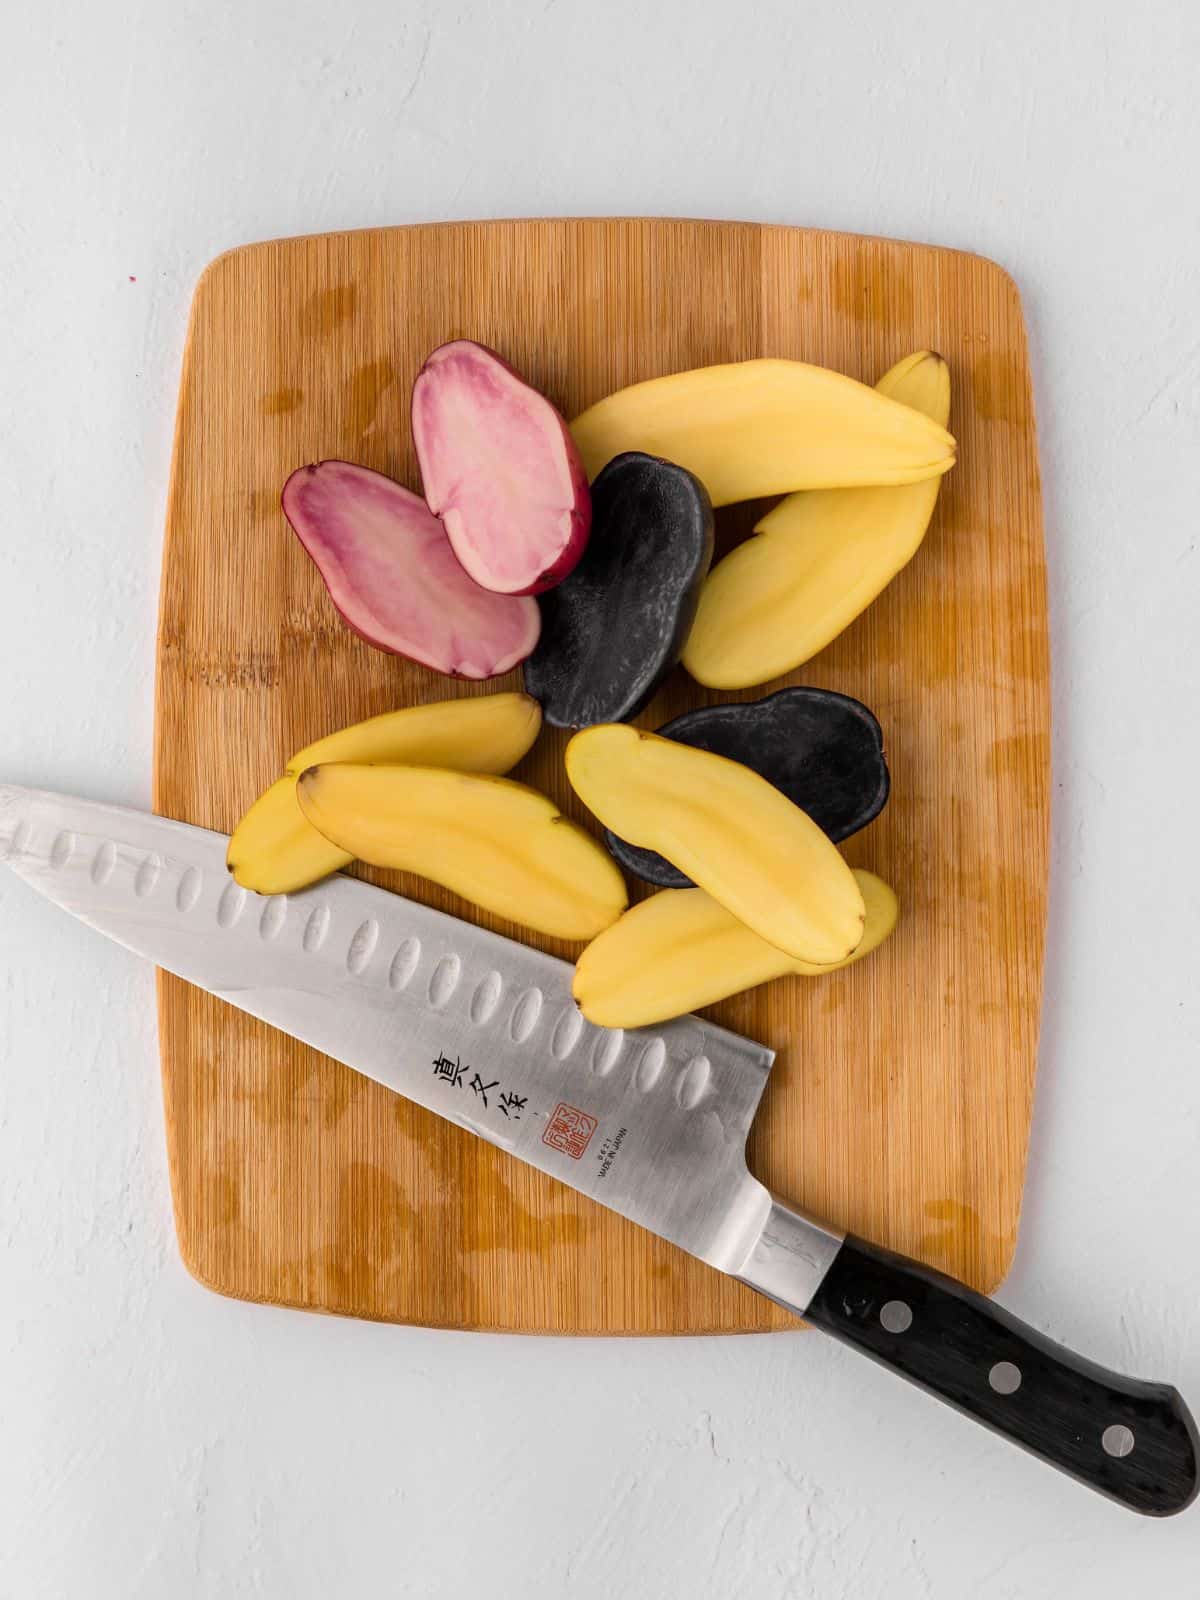 Fingerling potatoes cut in half on small cutting wooden cutting board next to knife.